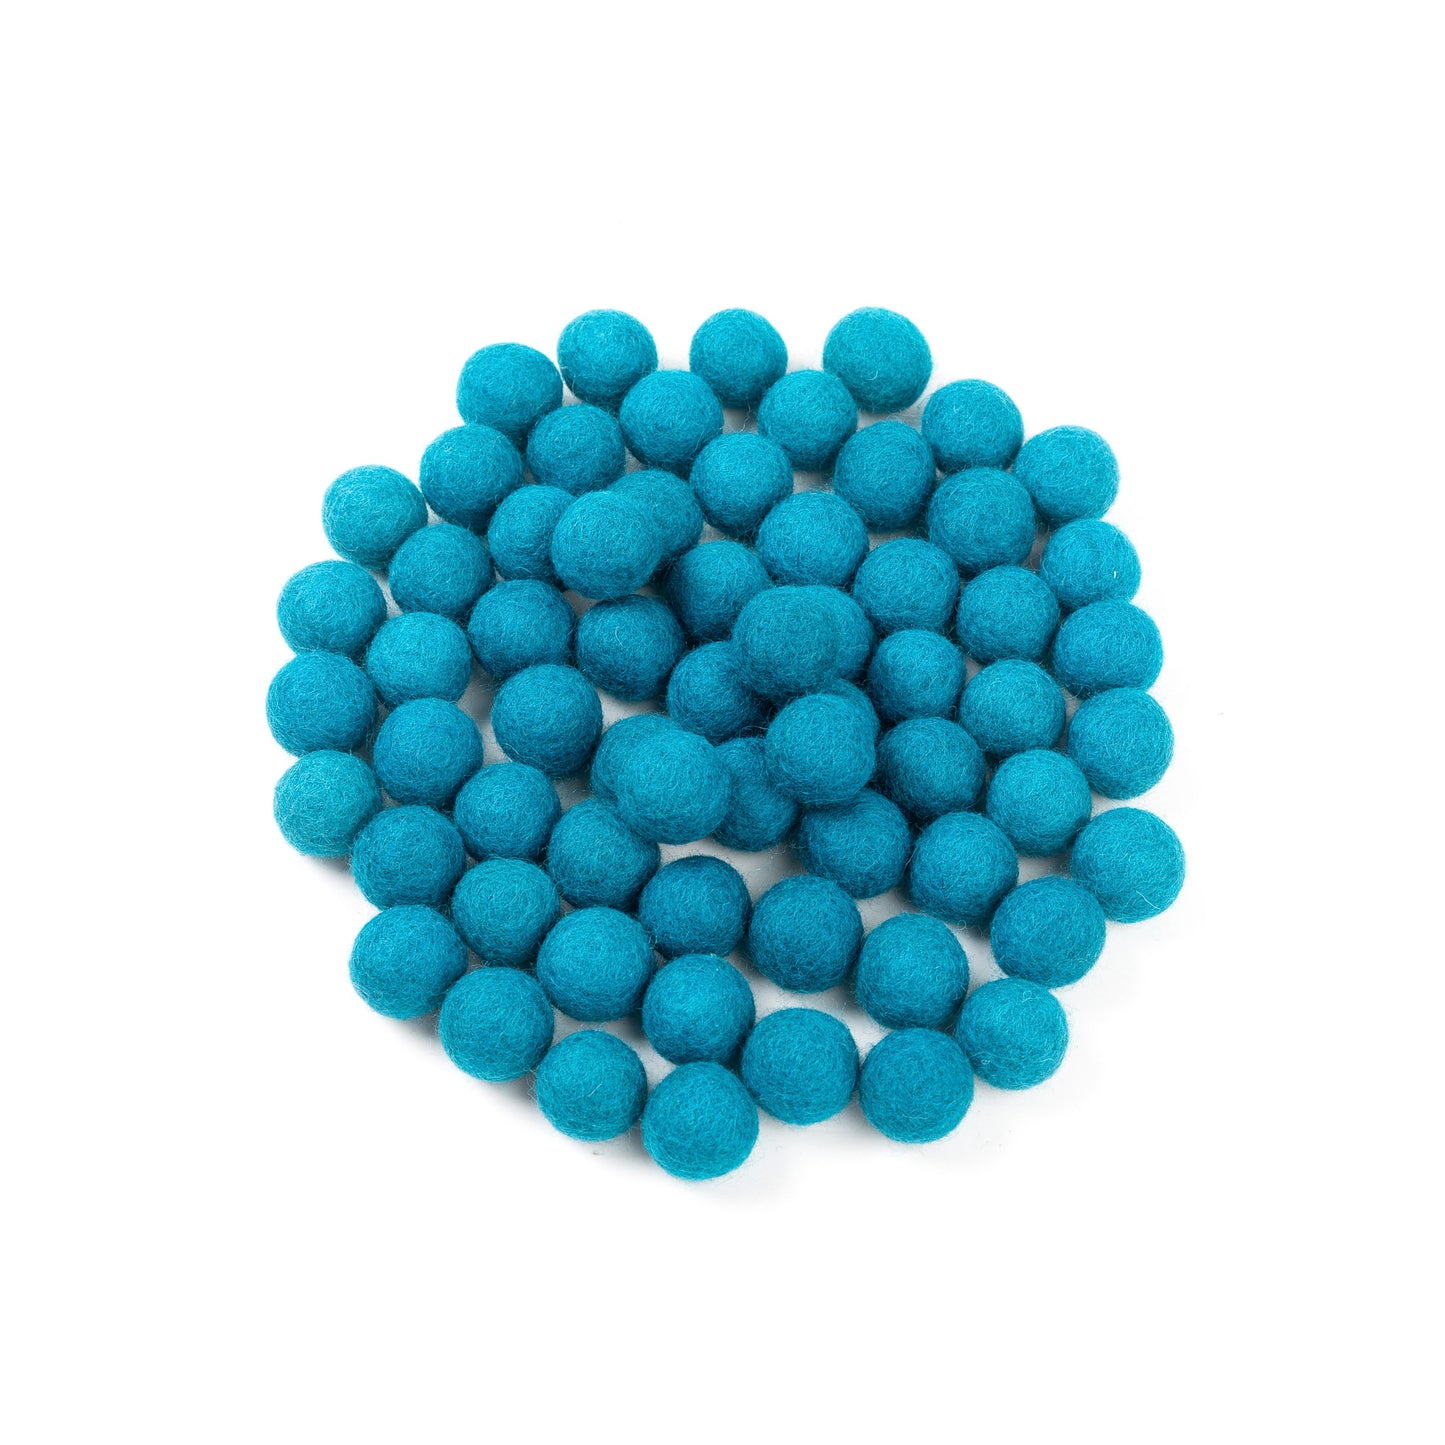 Handmade 2 cm Felt Balls in Assorted Colors for DIY Projects